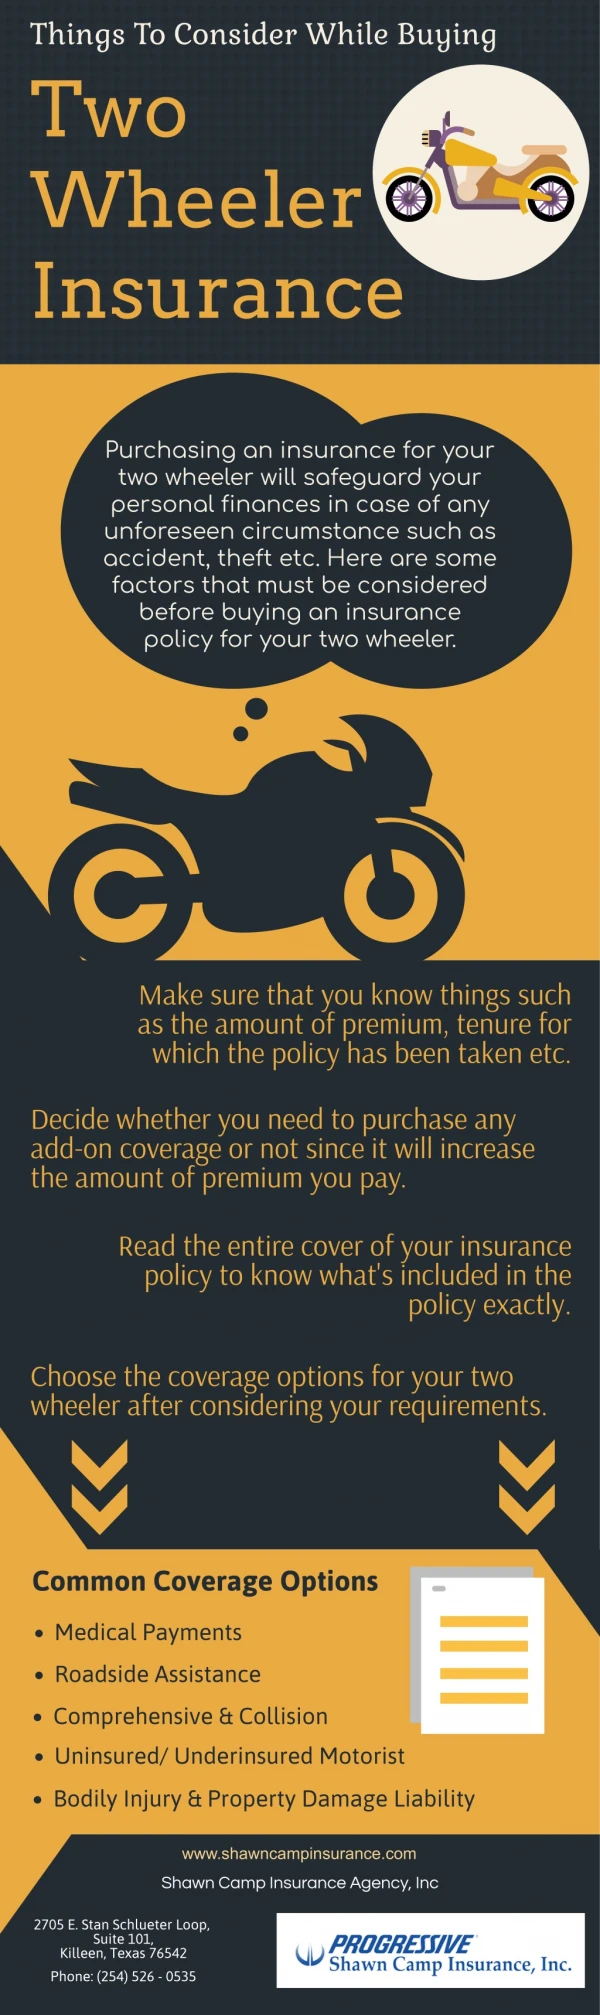 Things To Consider While Buying Two Wheeler Insurance